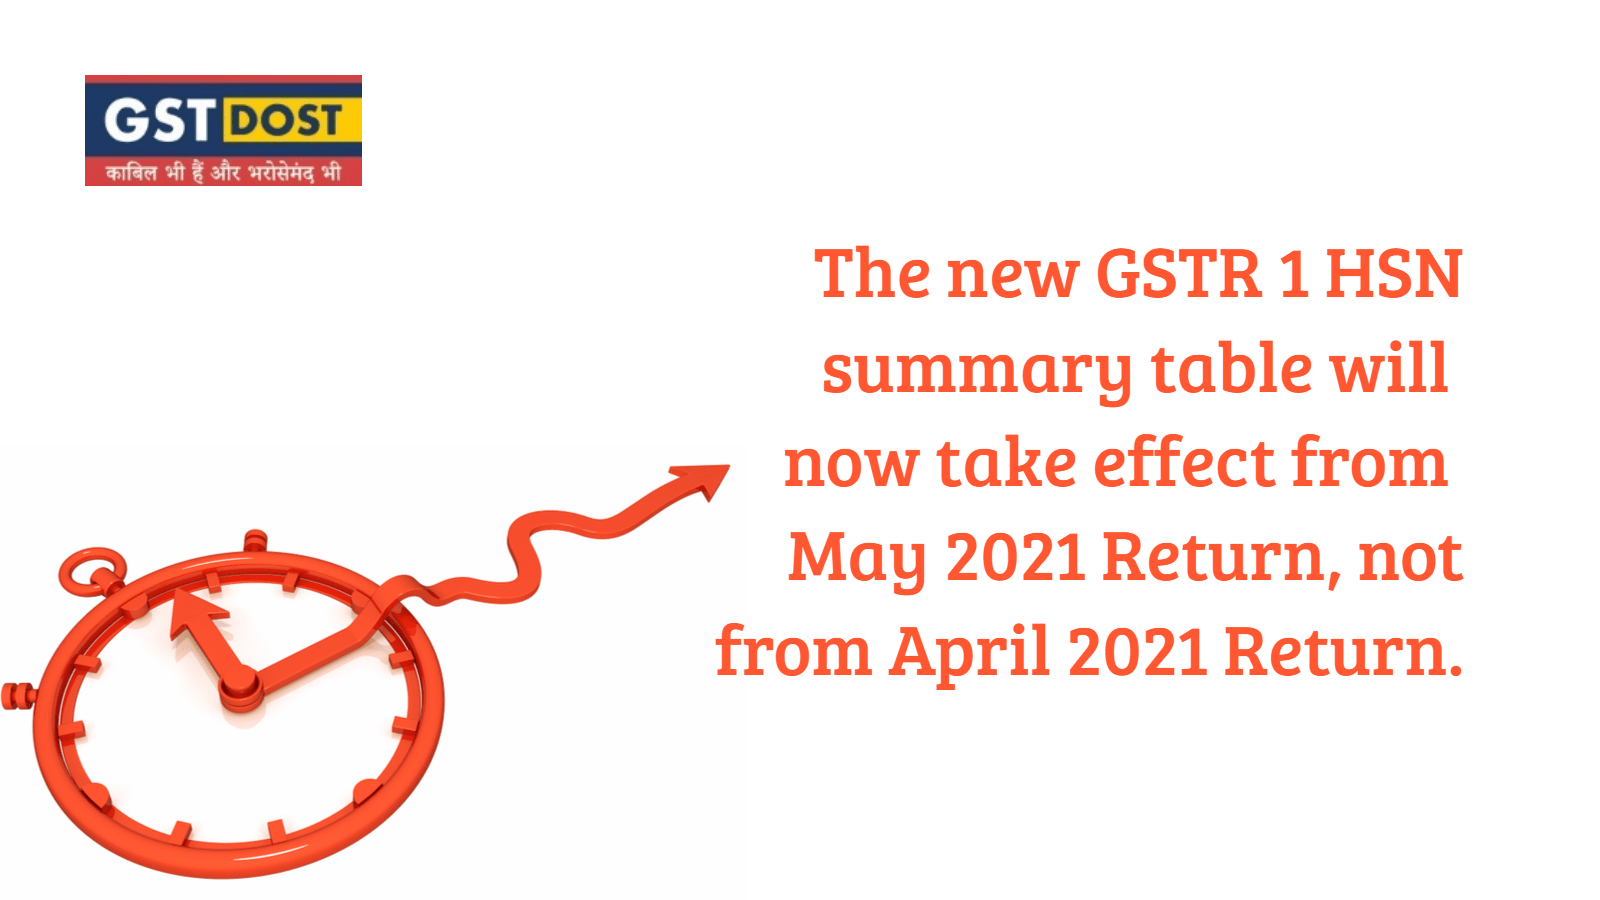 The new GSTR 1 HSN summary table will now take effect from May'21 Return, not from April'21 return.